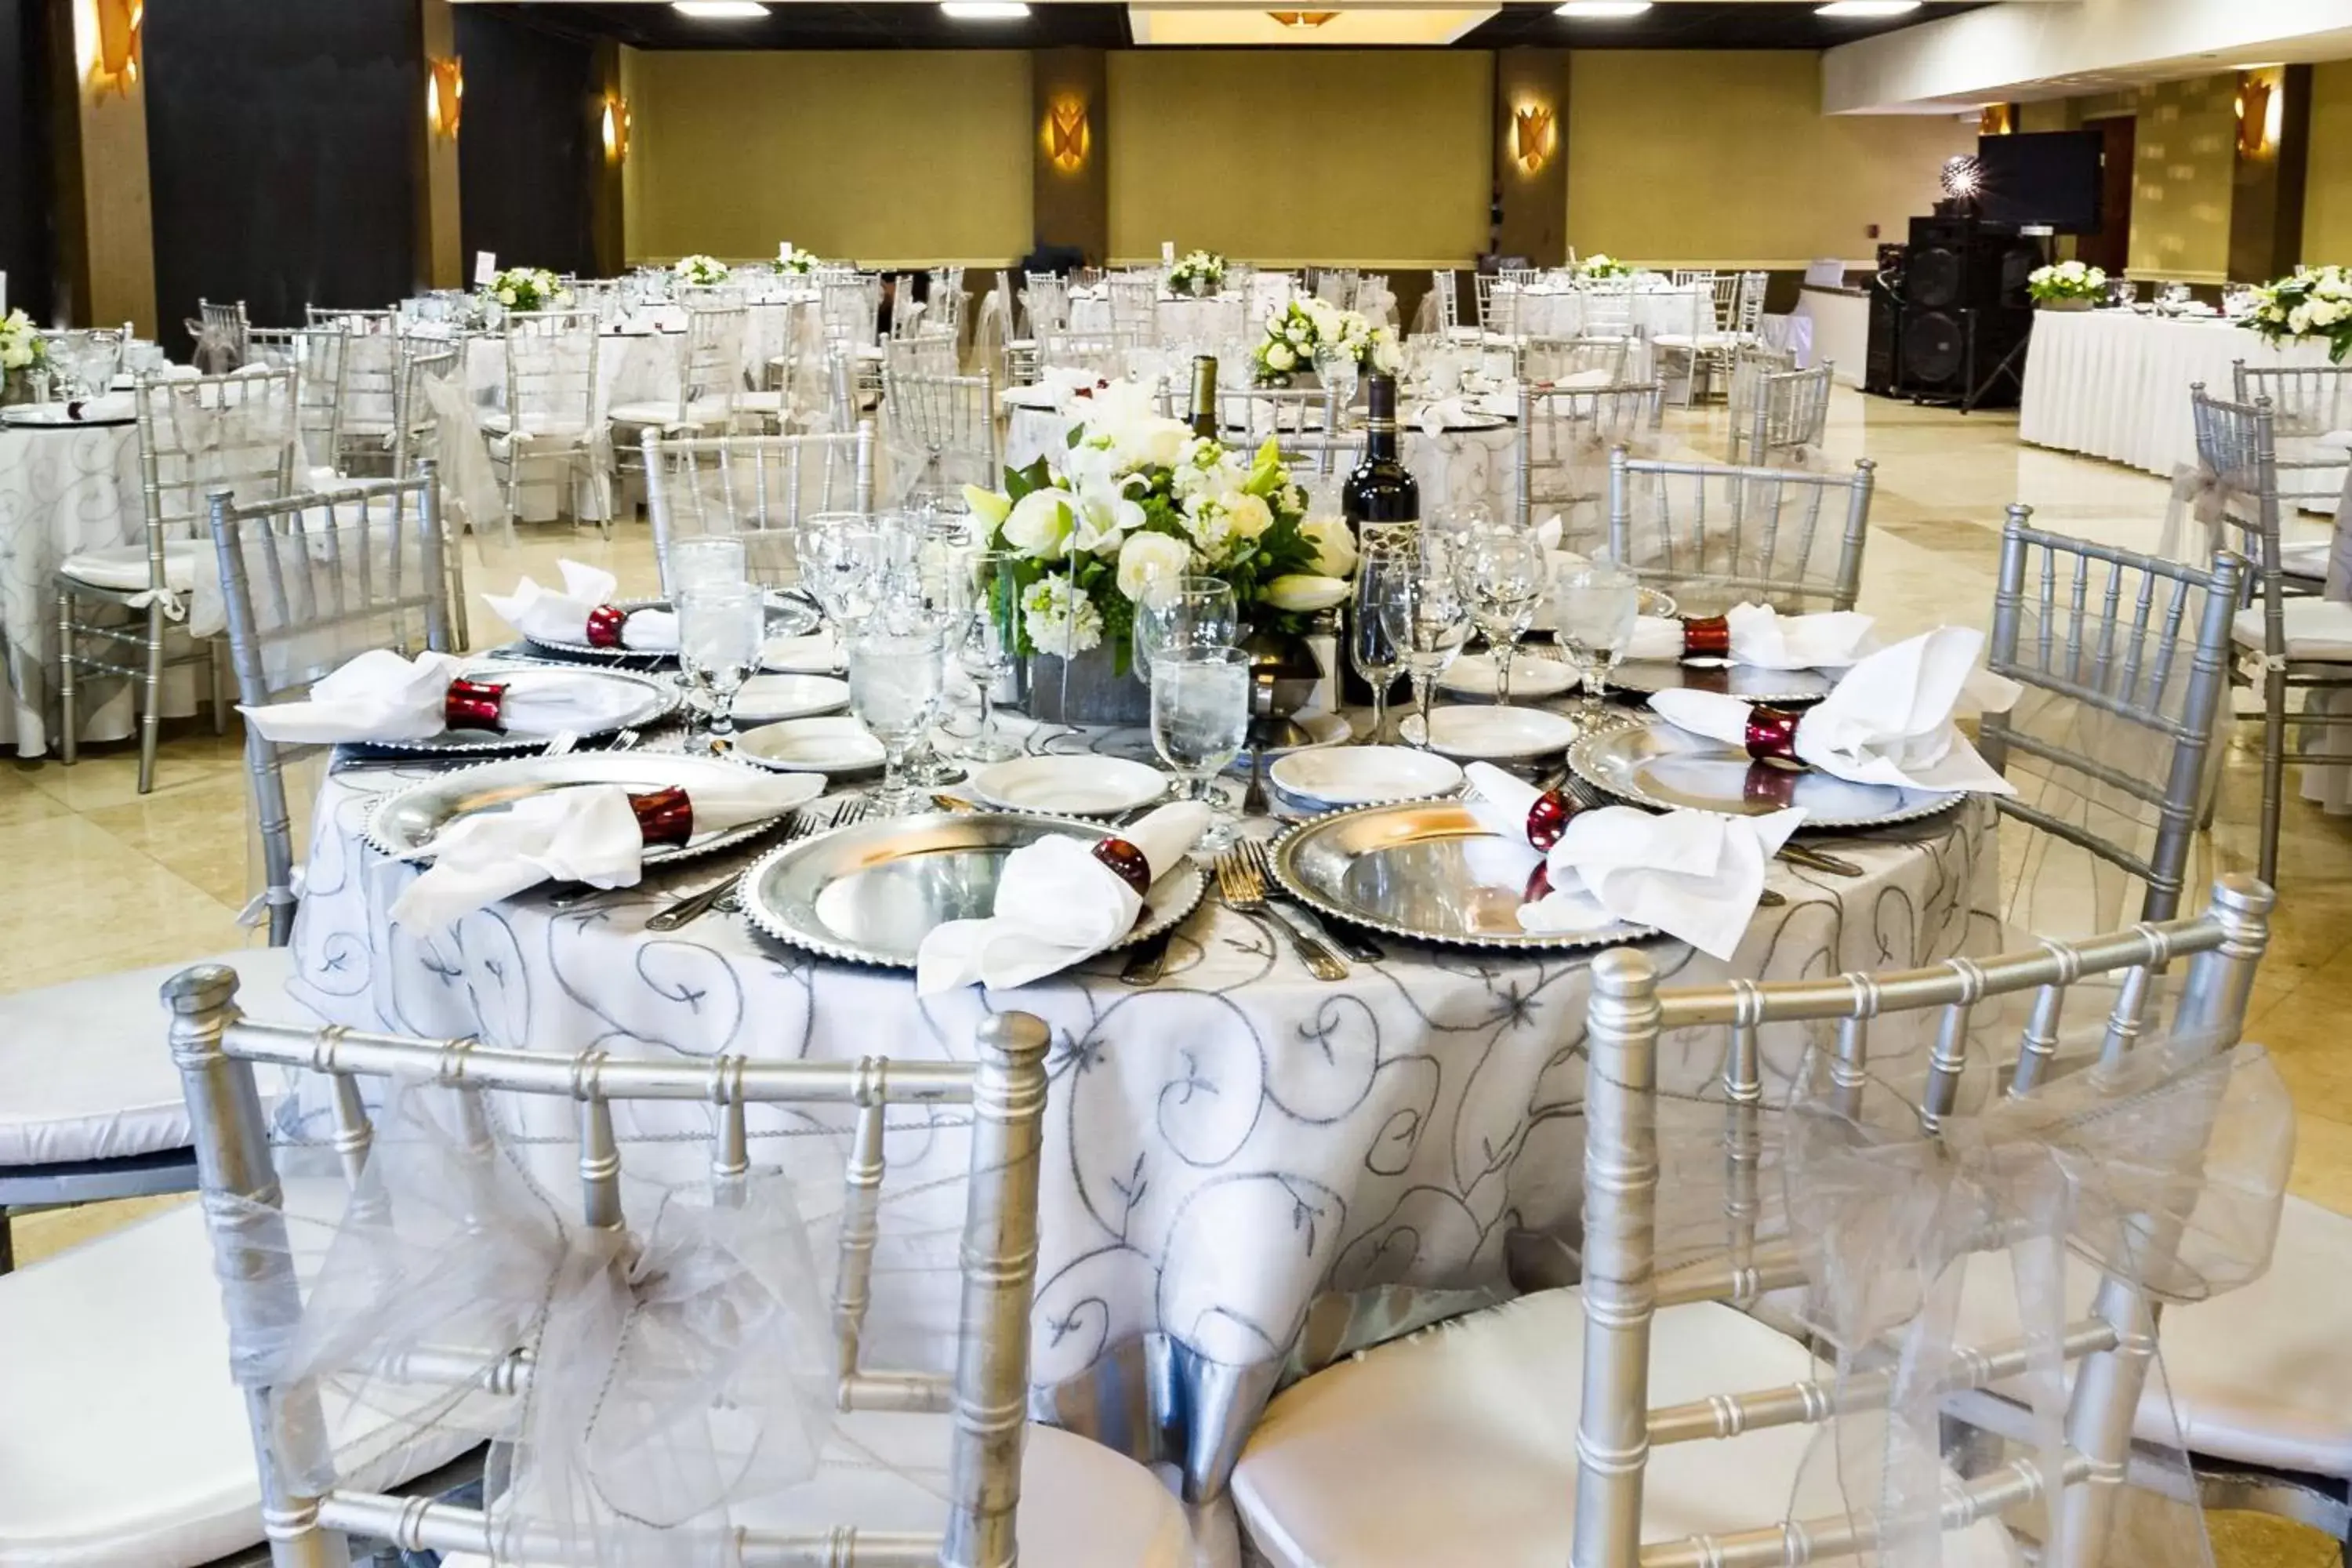 Banquet/Function facilities, Banquet Facilities in Courtyard by Marriott Los Angeles Westside